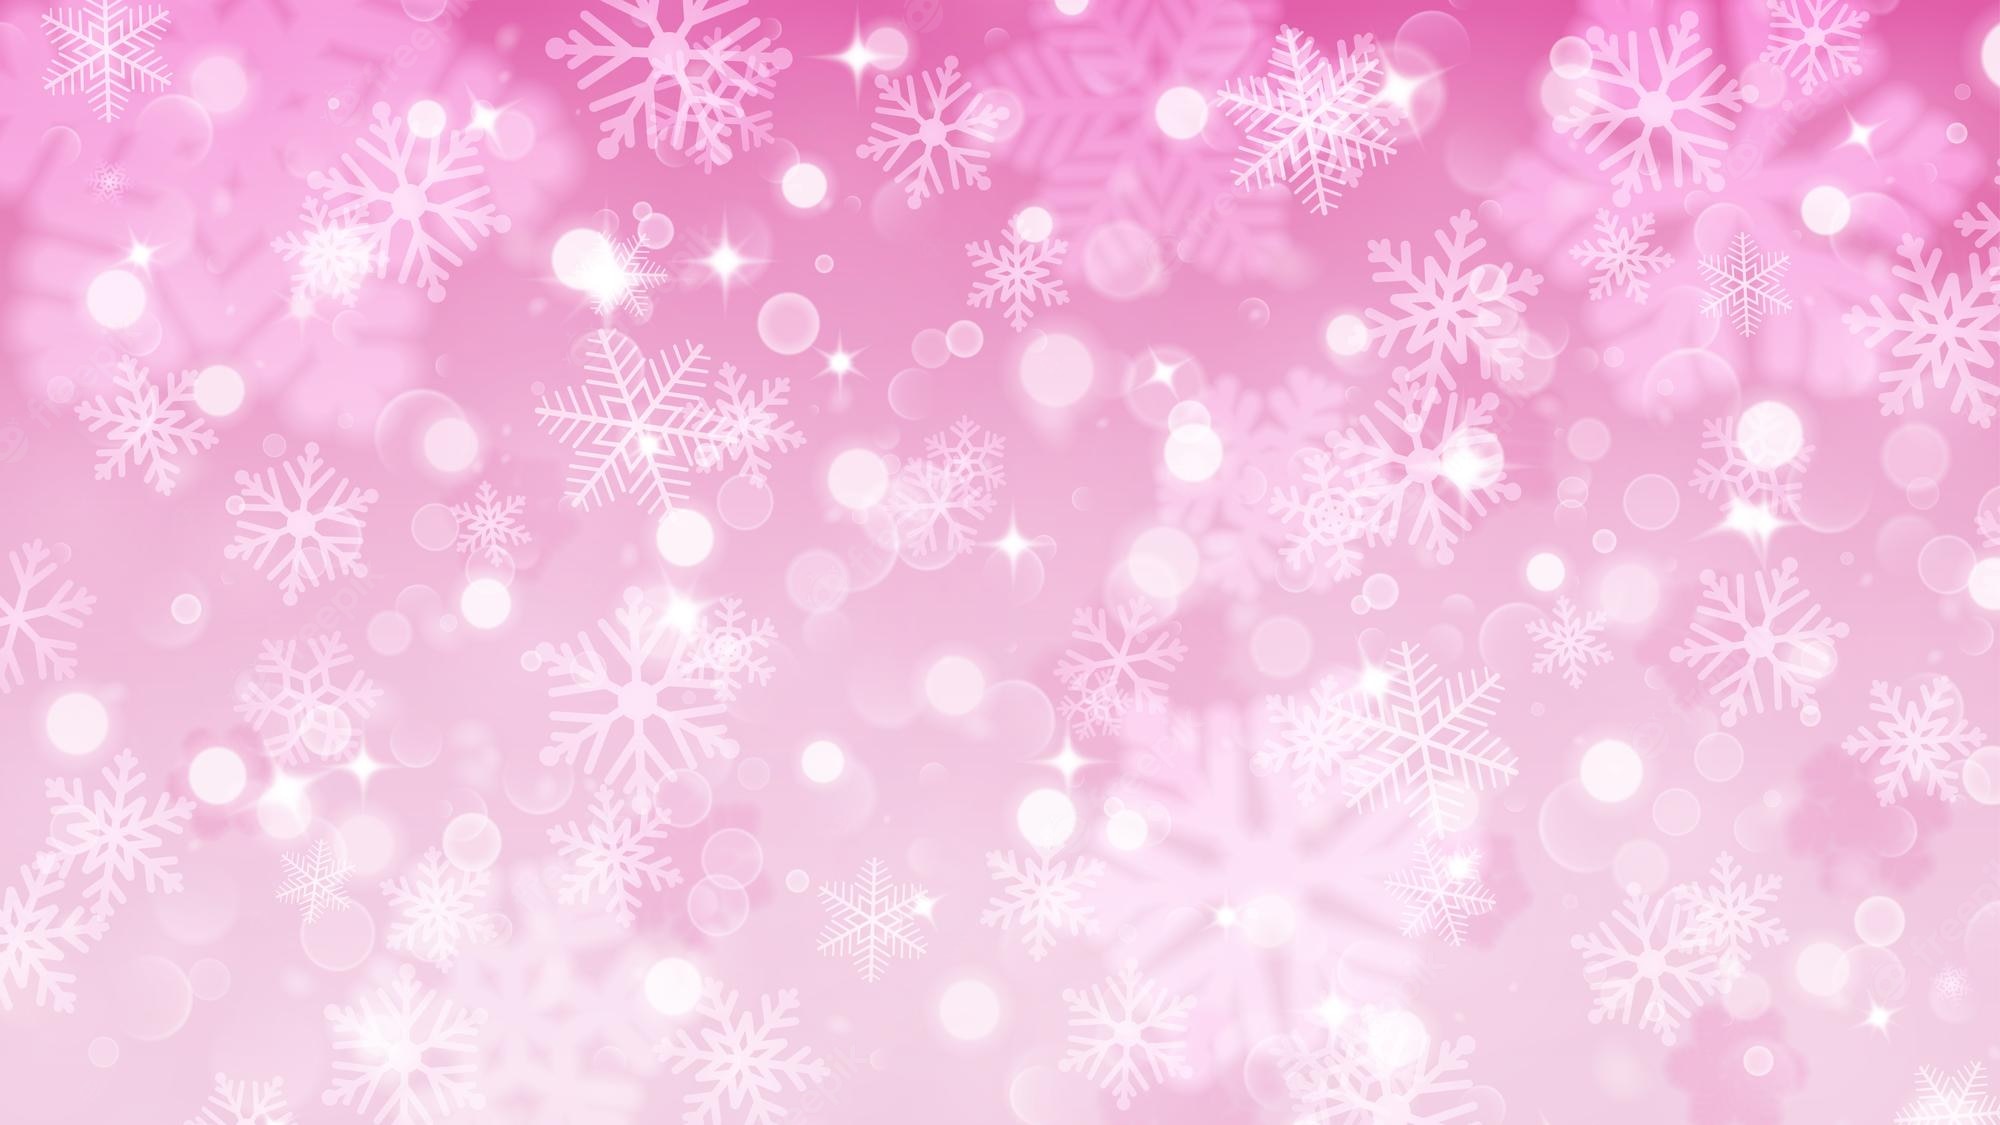 Premium Vector. Christmas background with white blurred and clear snowflakes on pink background big fuzzy and clear small snowflakes christmas vector illustration of beautiful snowflakes